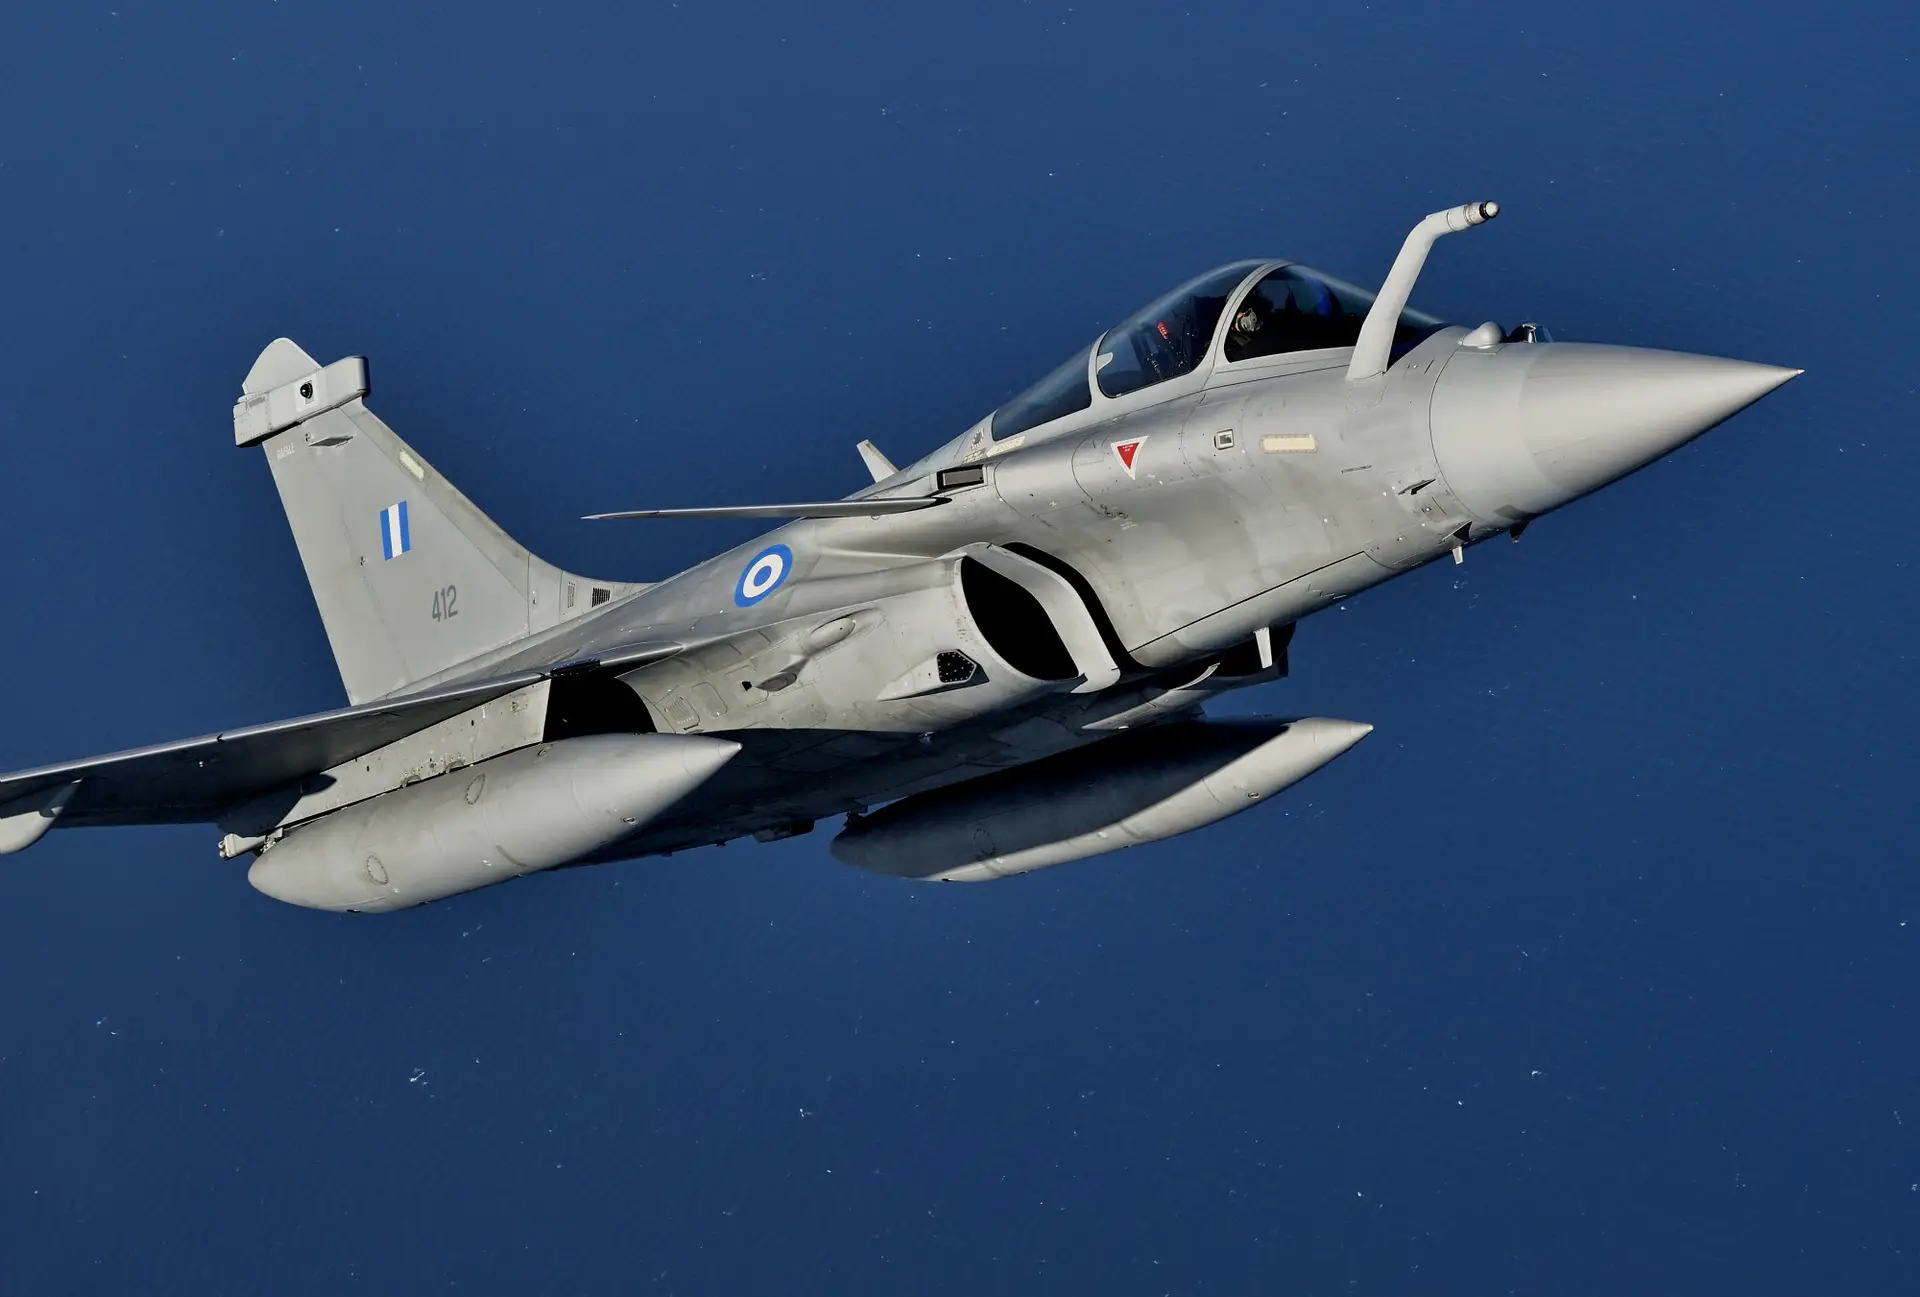 A Hellenic Air Force Rafale, Defense Express